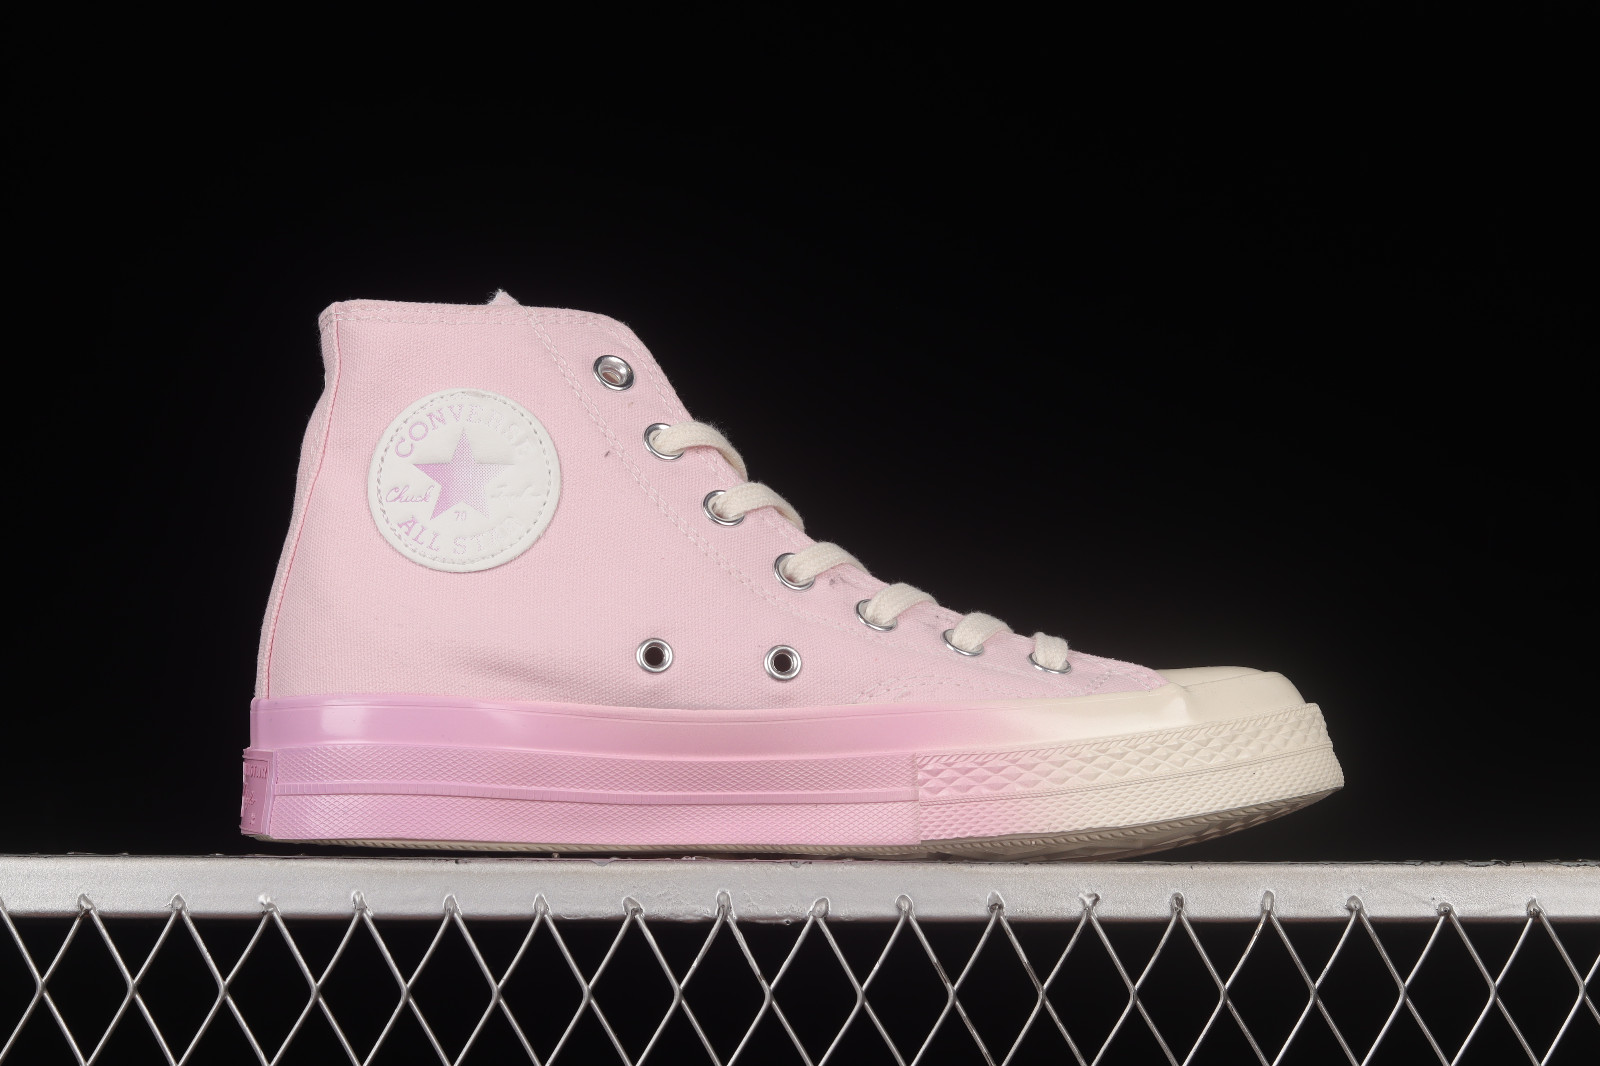 Converse Chuck Taylor All Star 70 Hi Purple White - MultiscaleconsultingShops